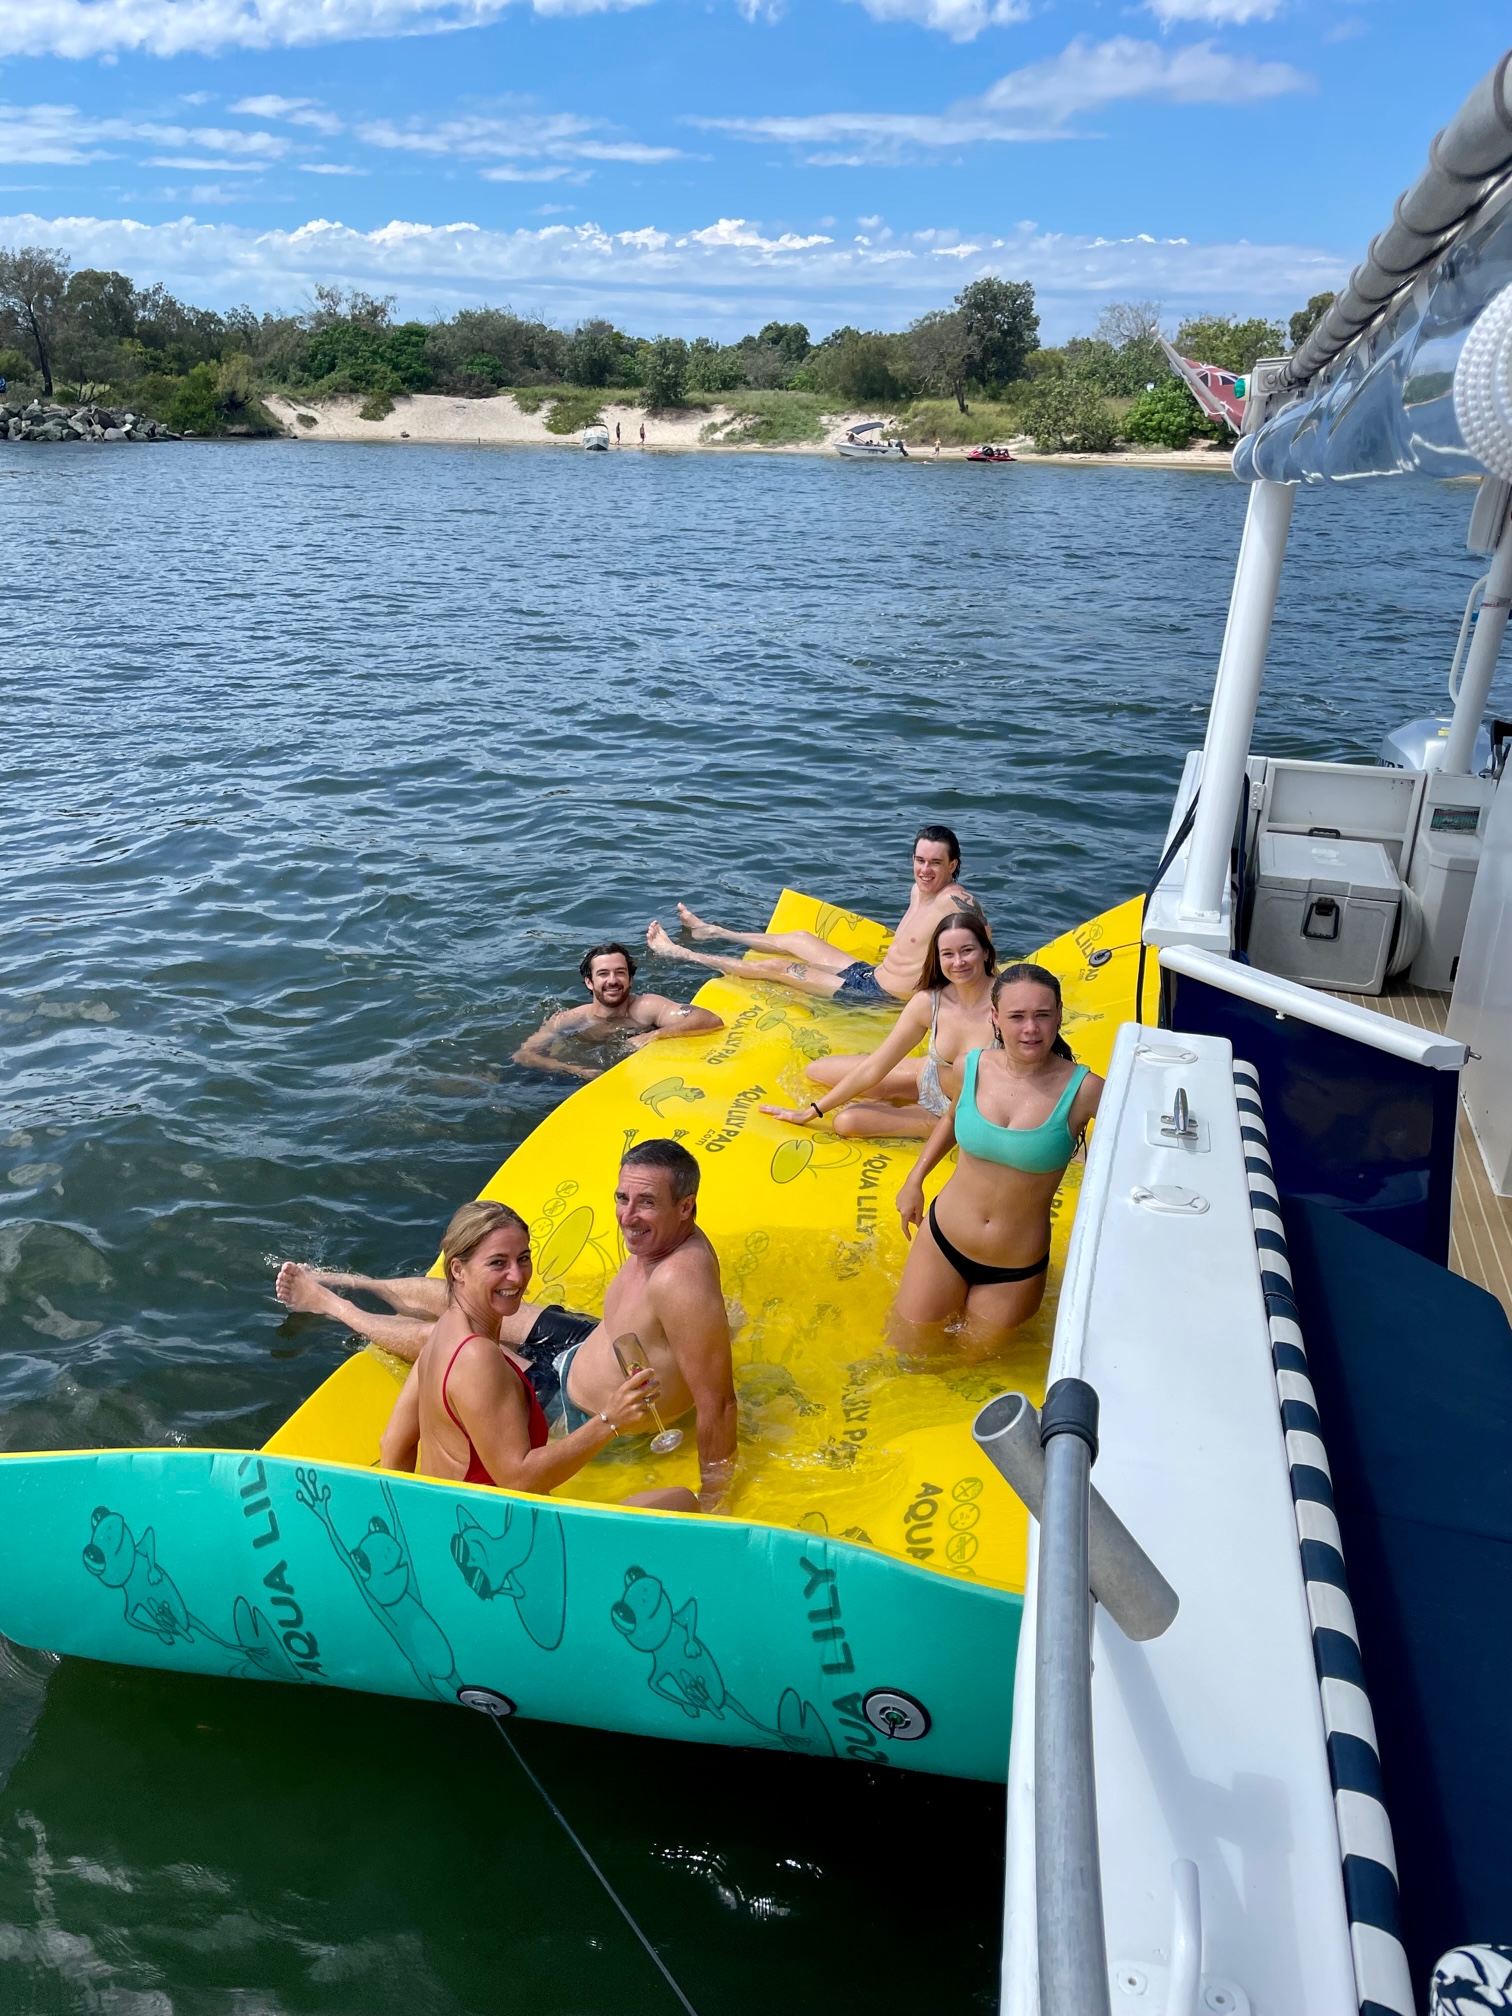 PRIVATE Broadwater Charter - Custom Pickup Location - Up to 12 guests - hourly rate